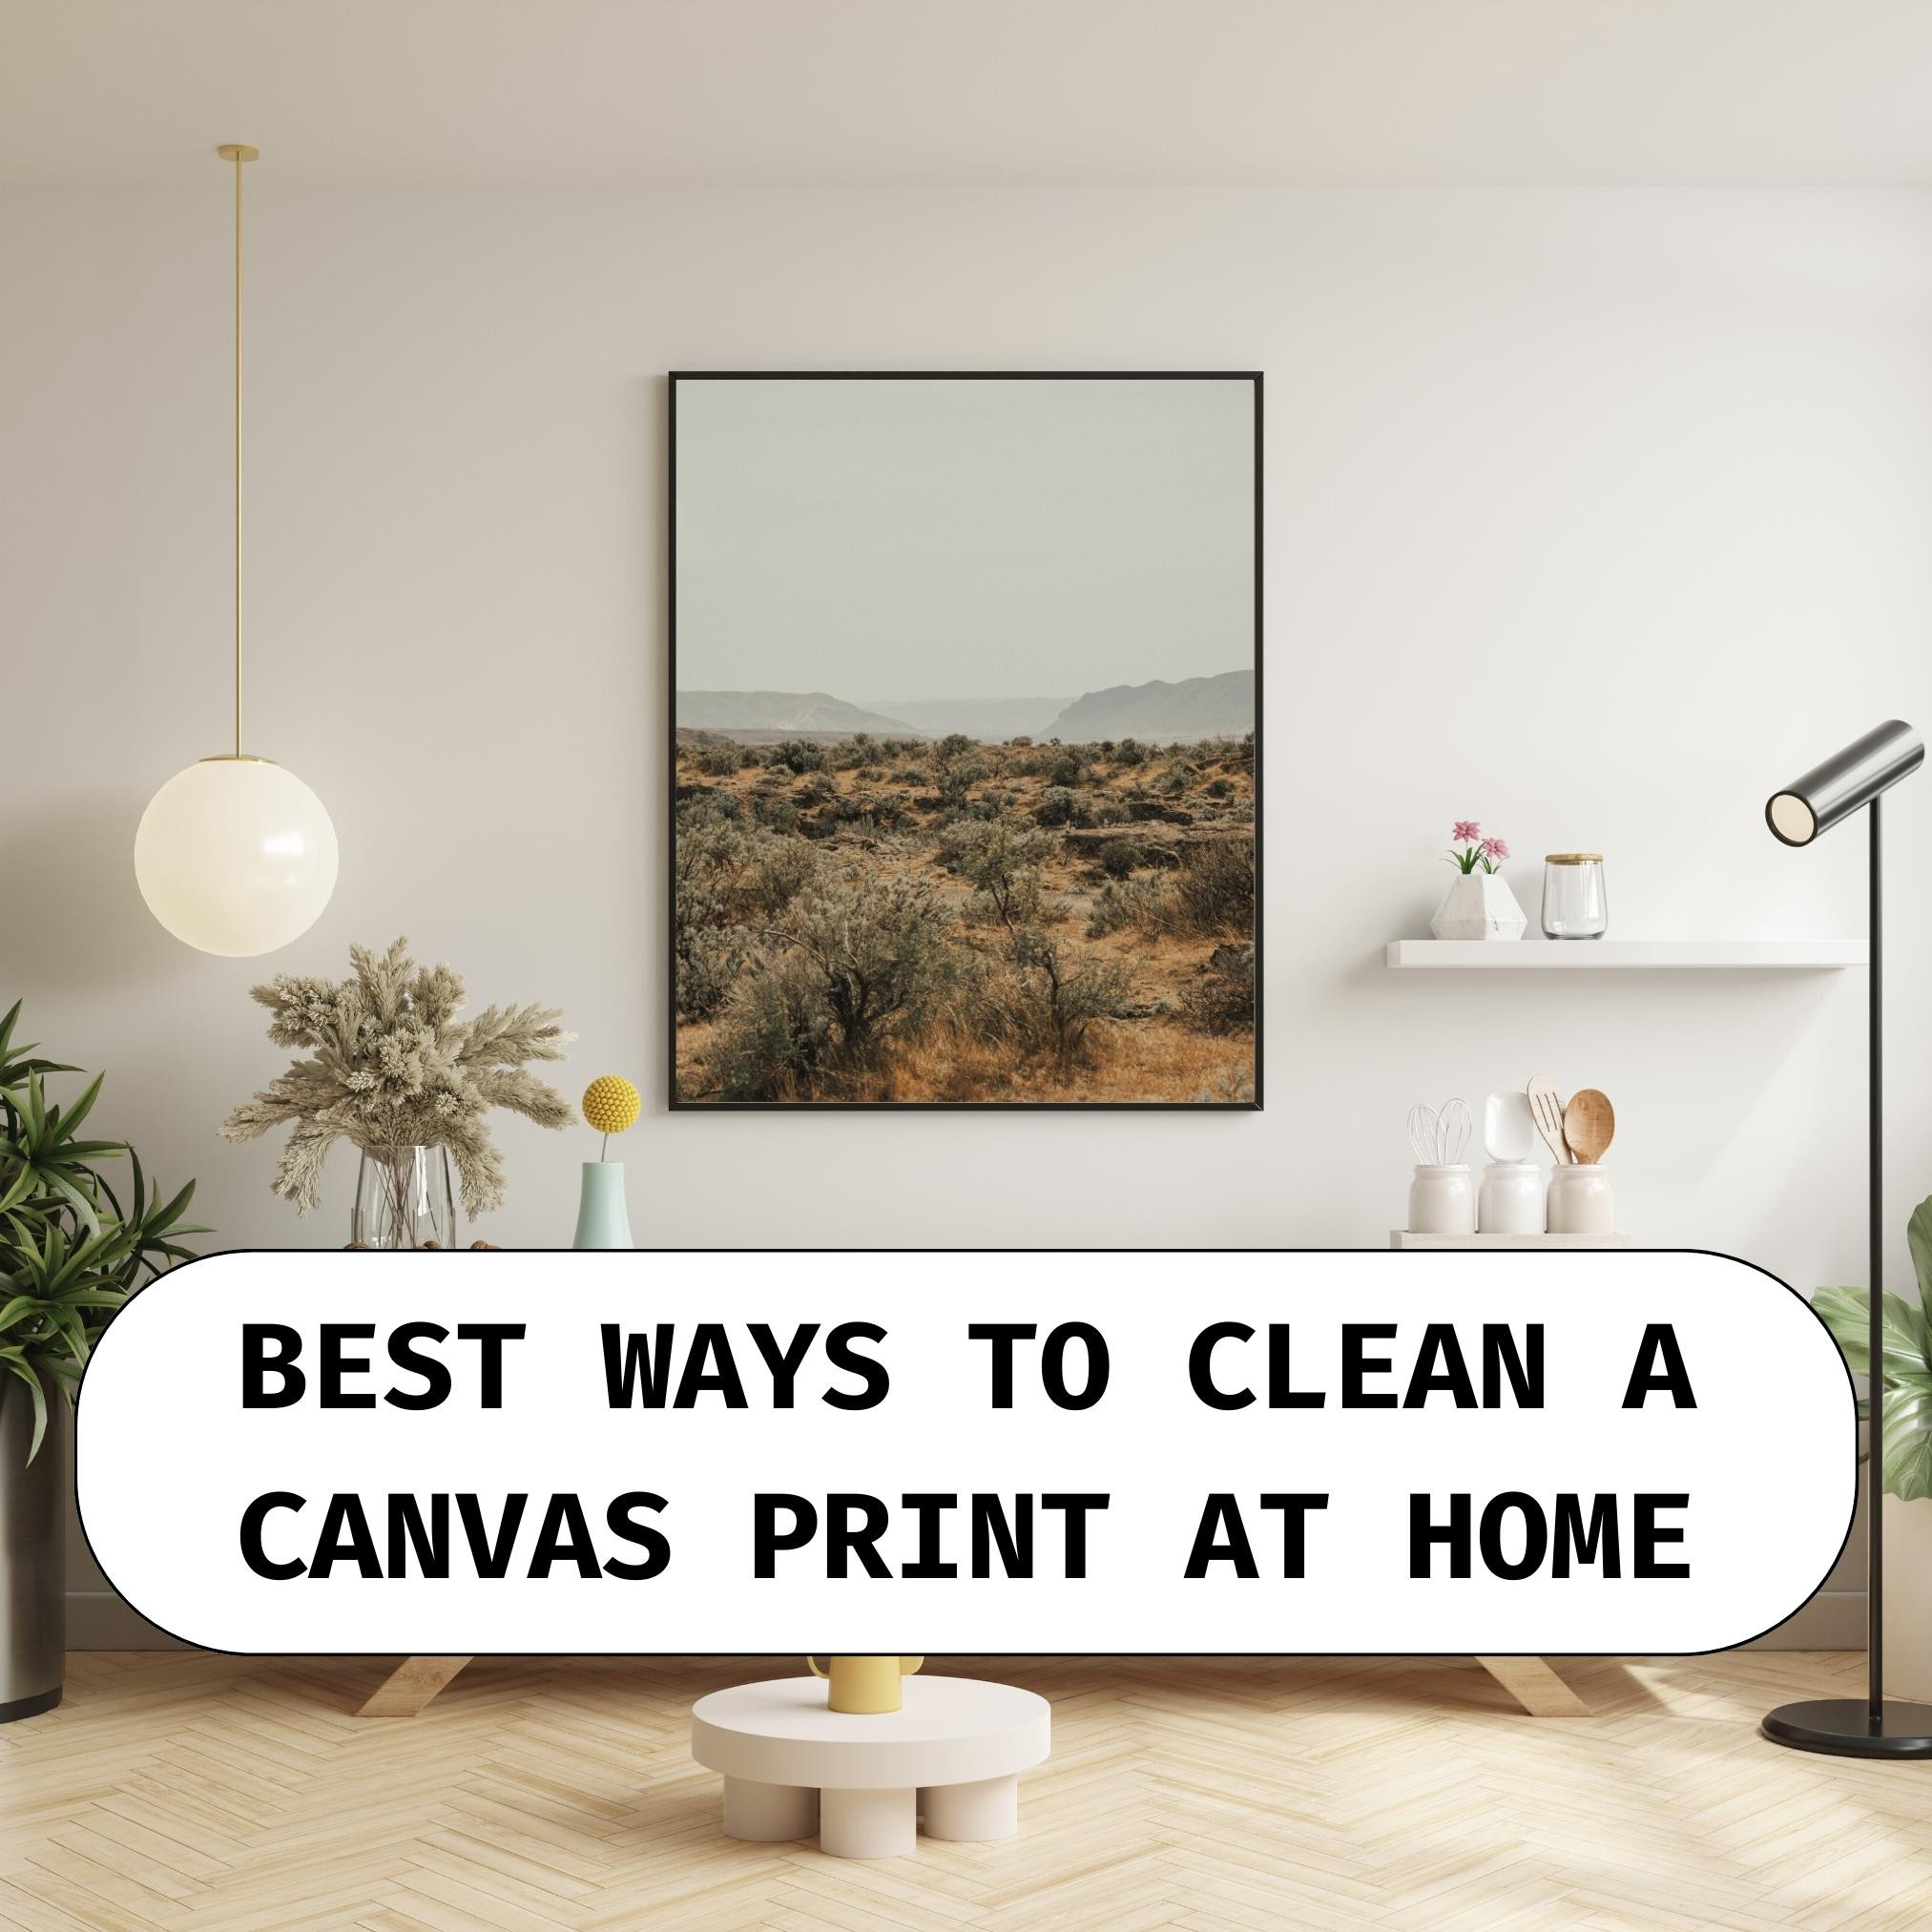 Best Ways to Clean a Canvas Print at Home